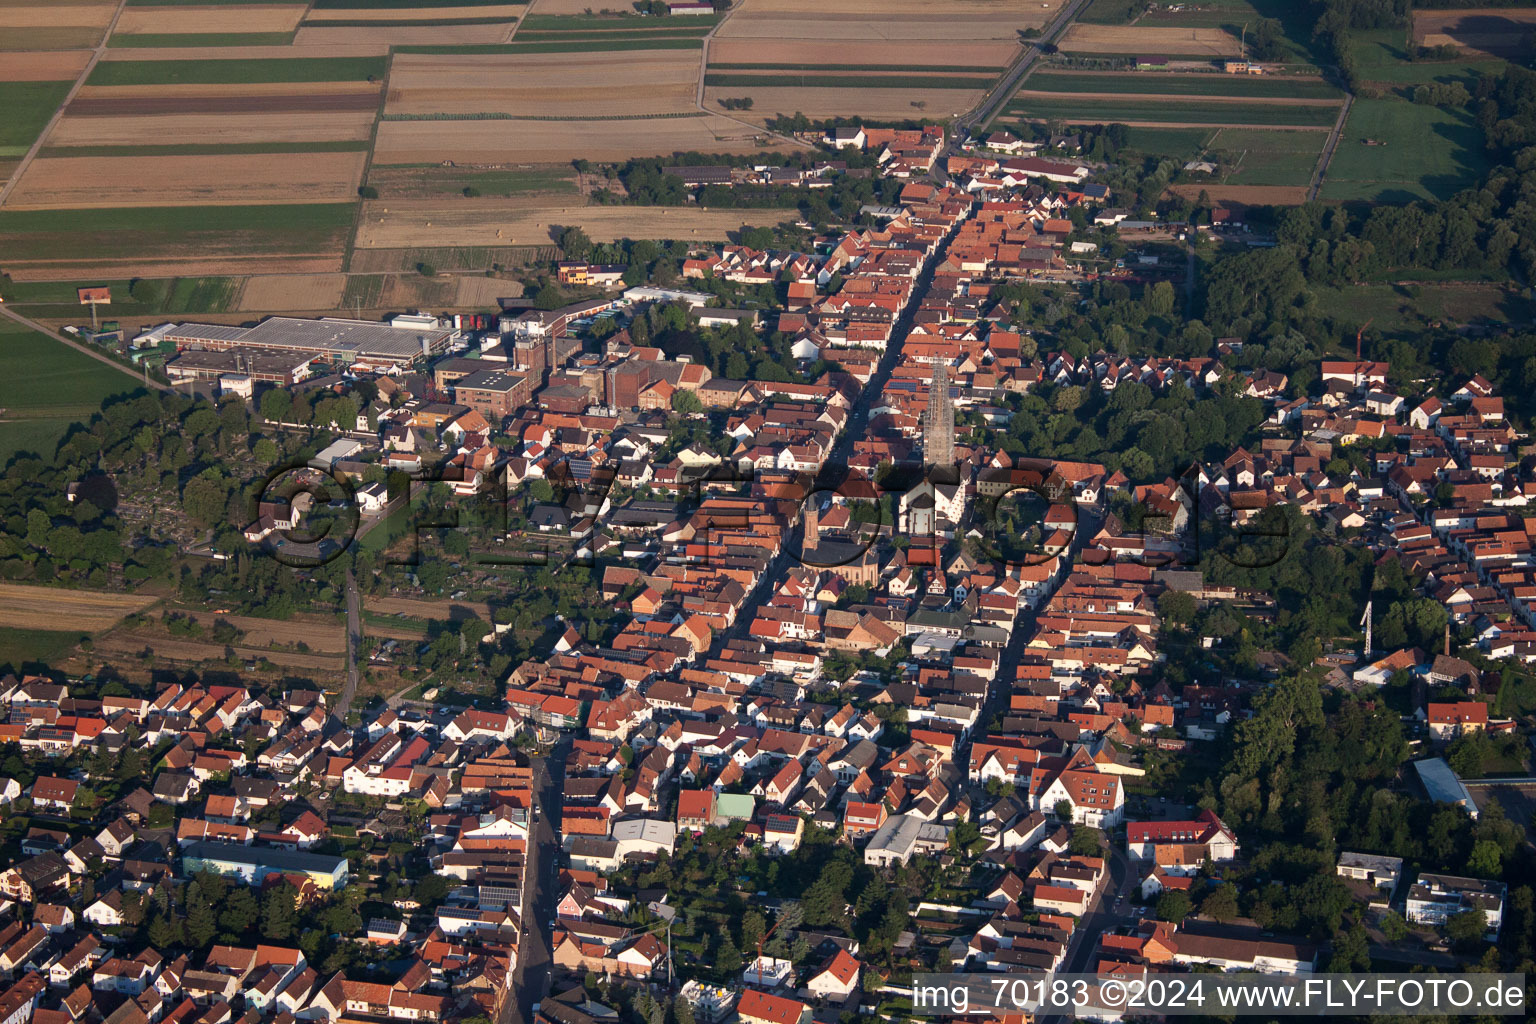 Town View of the streets and houses of the residential areas in Bellheim in the state Rhineland-Palatinate from above